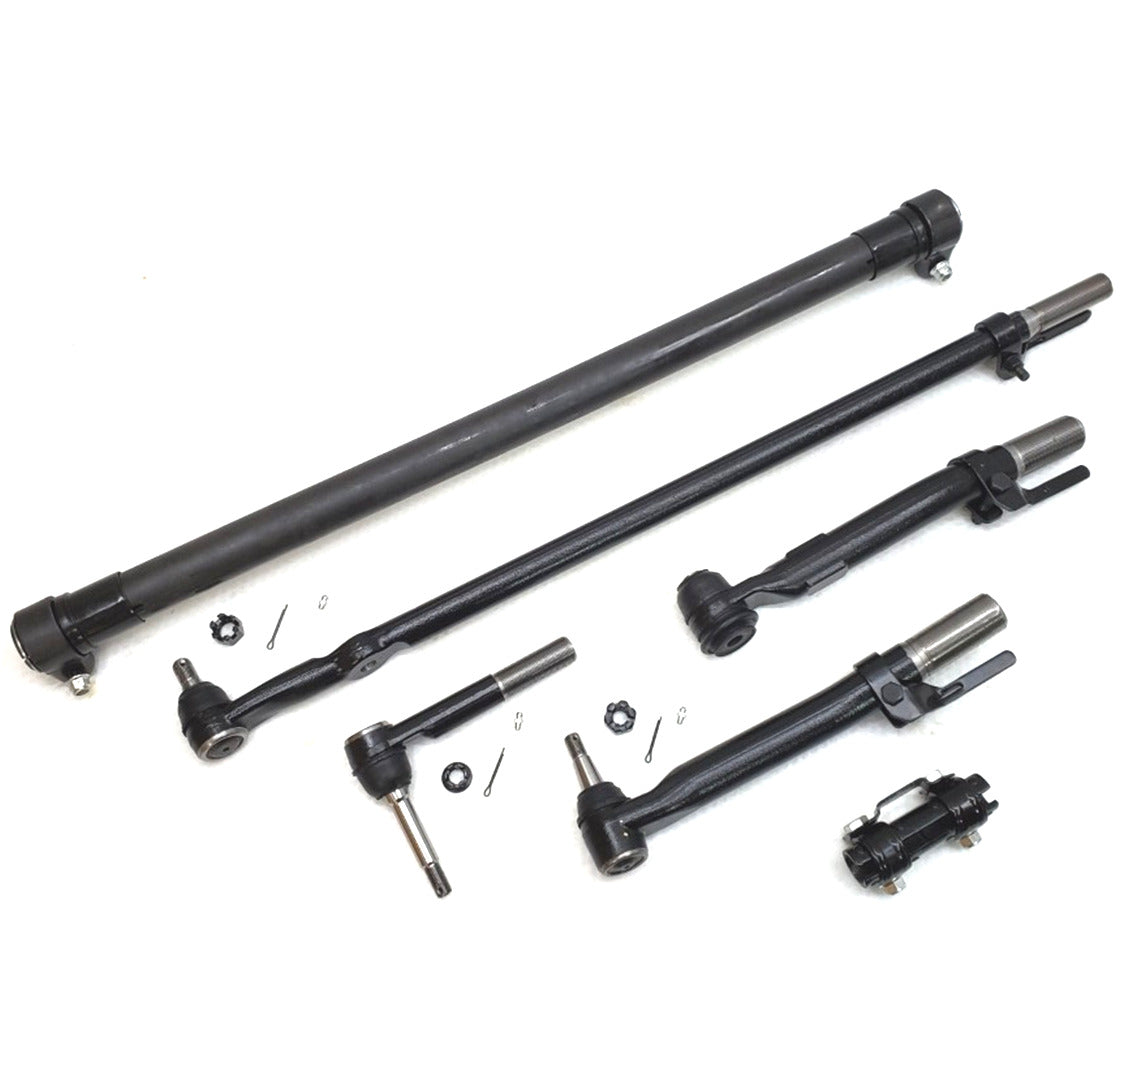 Lifetime Drag Link Tie Rod Sleeve Kit for 2011-2016 Ford F450, F550 Super Duty with Wide Track Axle